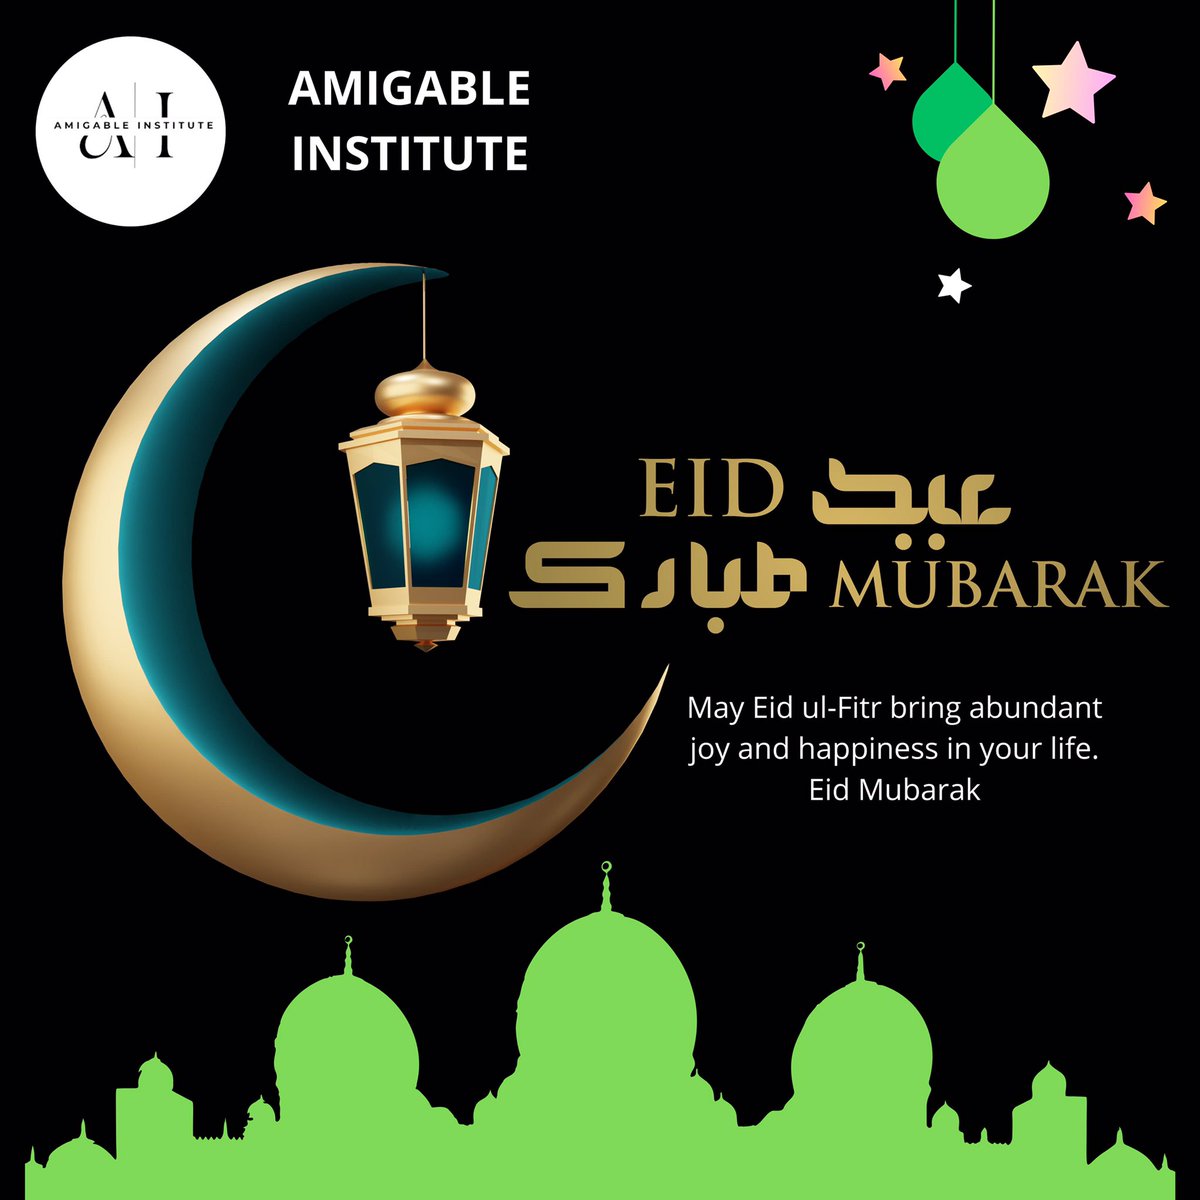 ☪️ Eid Mubarak from Amigable Institute !! 

Wishing you joy, happiness, and blessings on this special occasion. May your celebrations be filled with love and unity. 🫂👐🏼

 #EidMubarak #amigableinstitute #arabic #urdu #eid #spanishinstitute #learnspanishlanguage #foreignlanguages